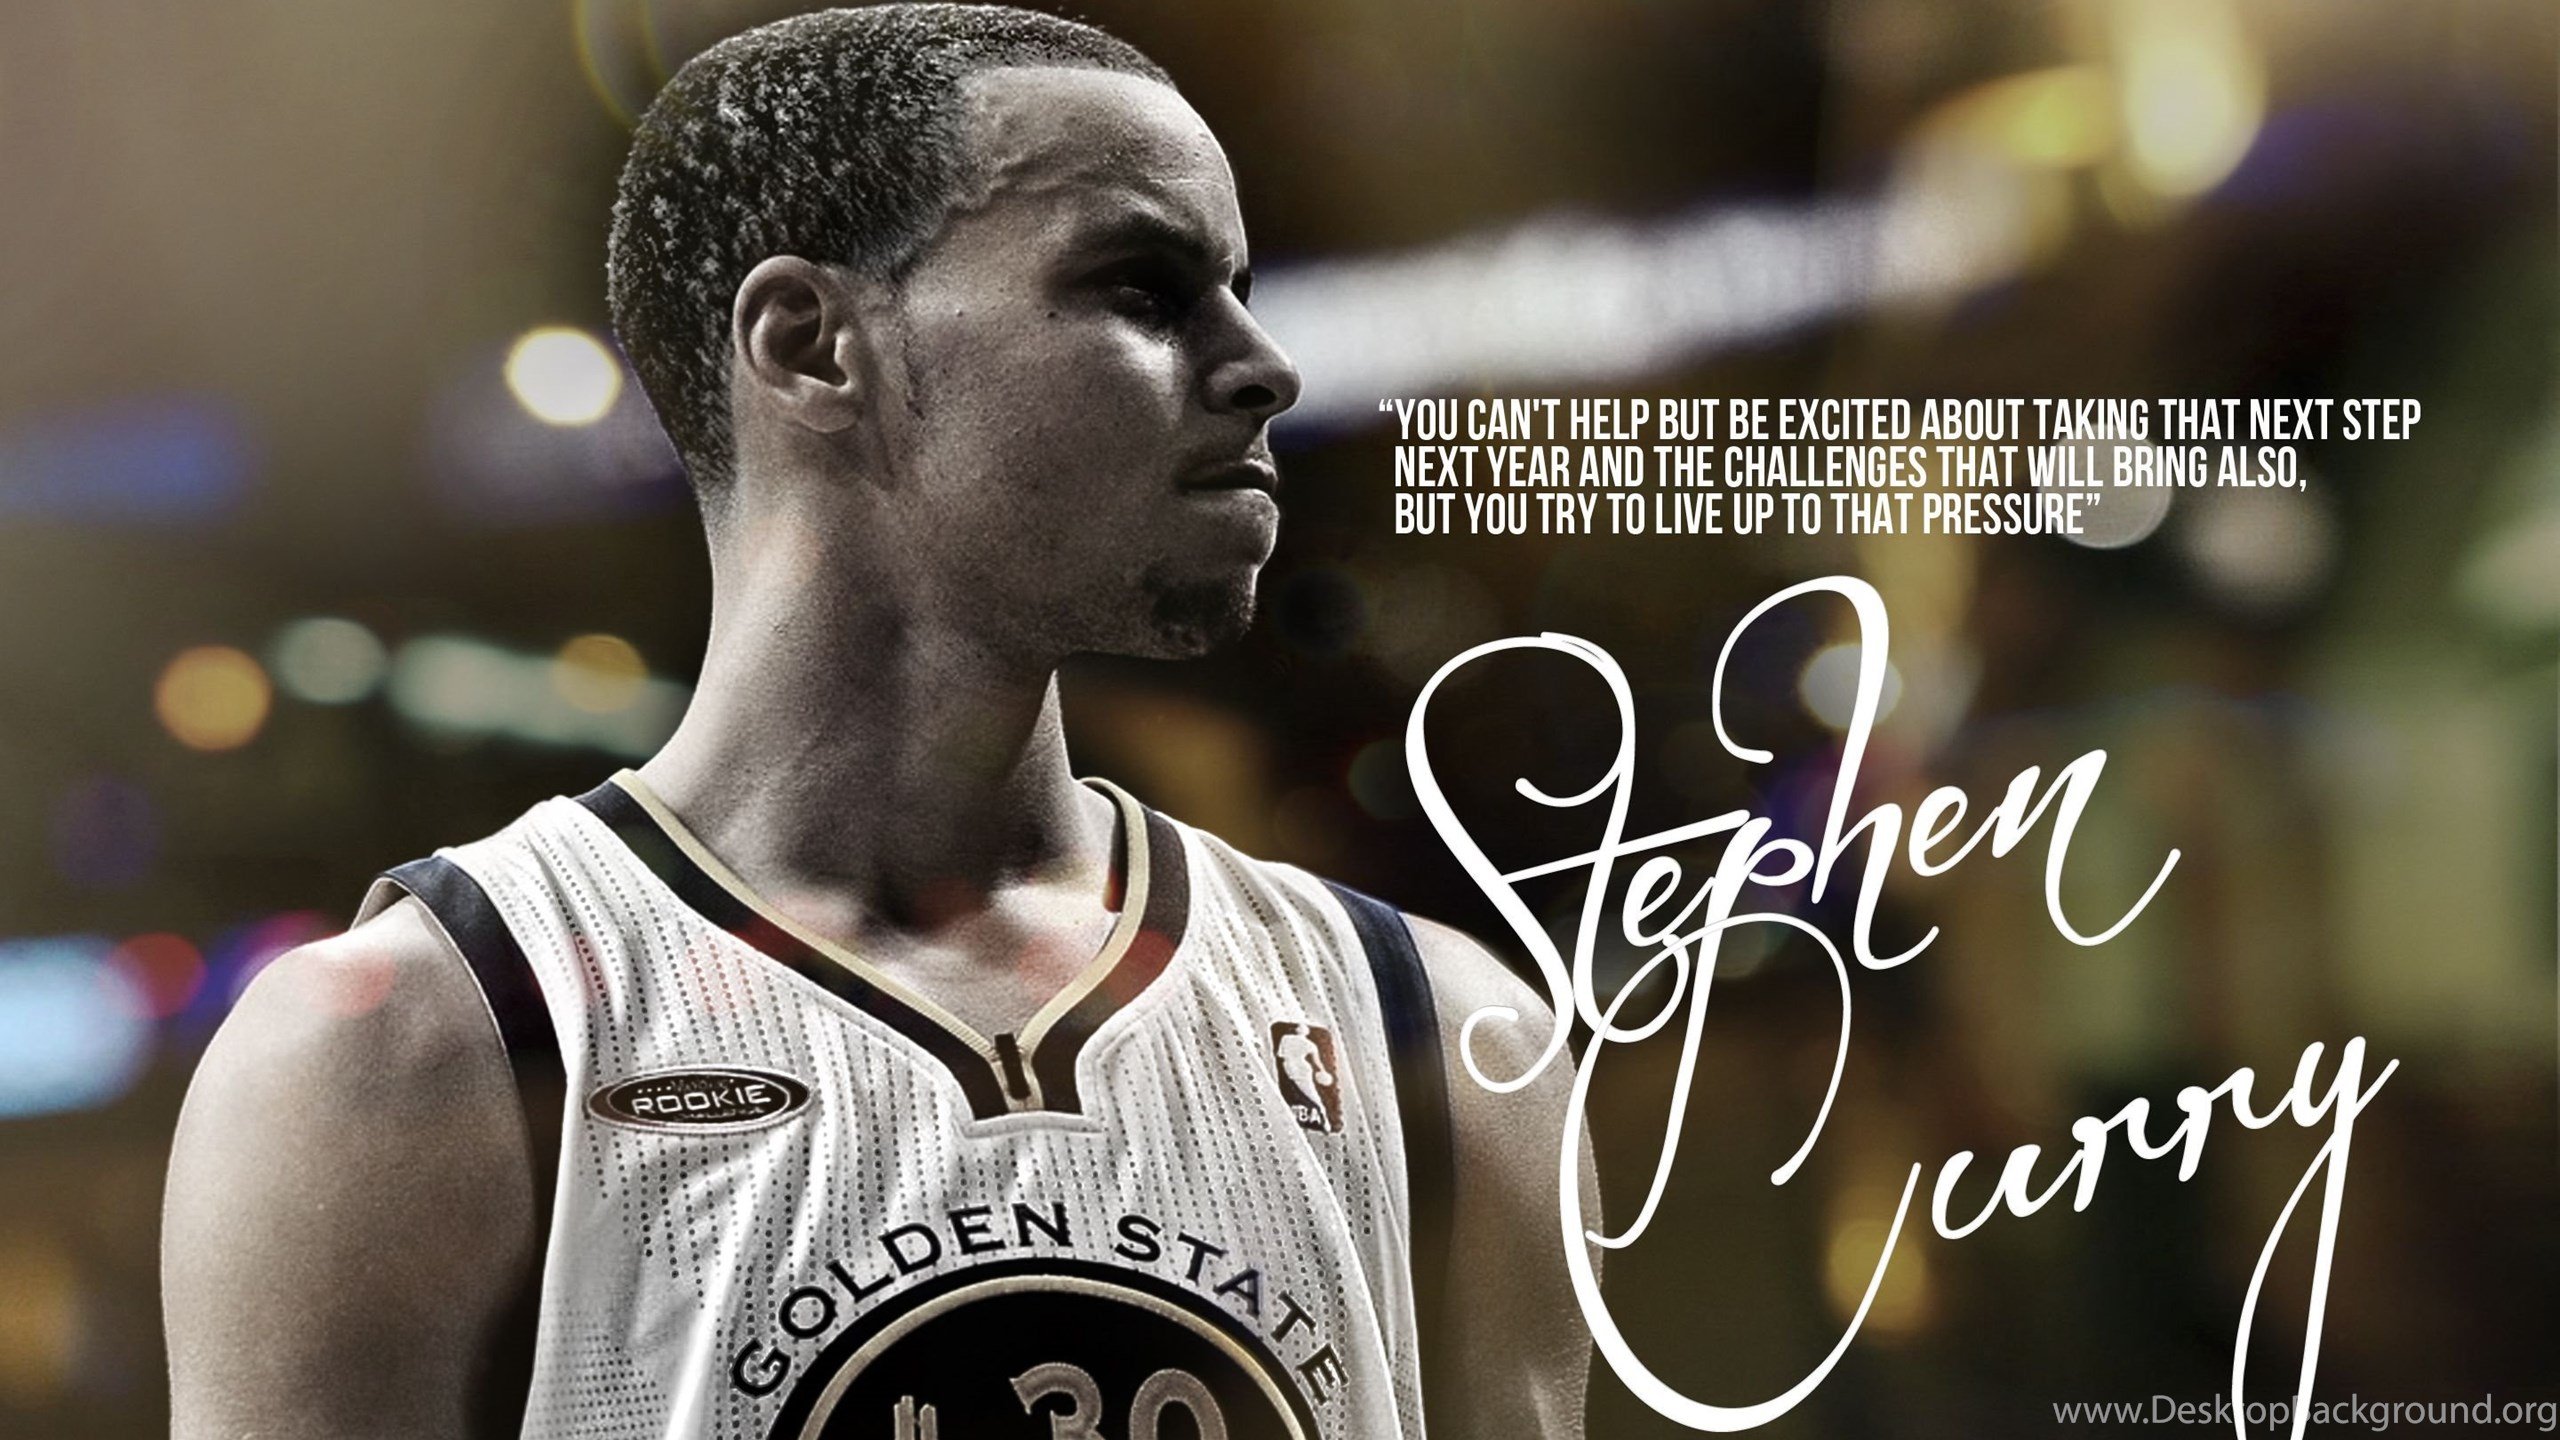 Stephen Curry Quotes Wallpaper Free Wallpaper Page Desktop Background